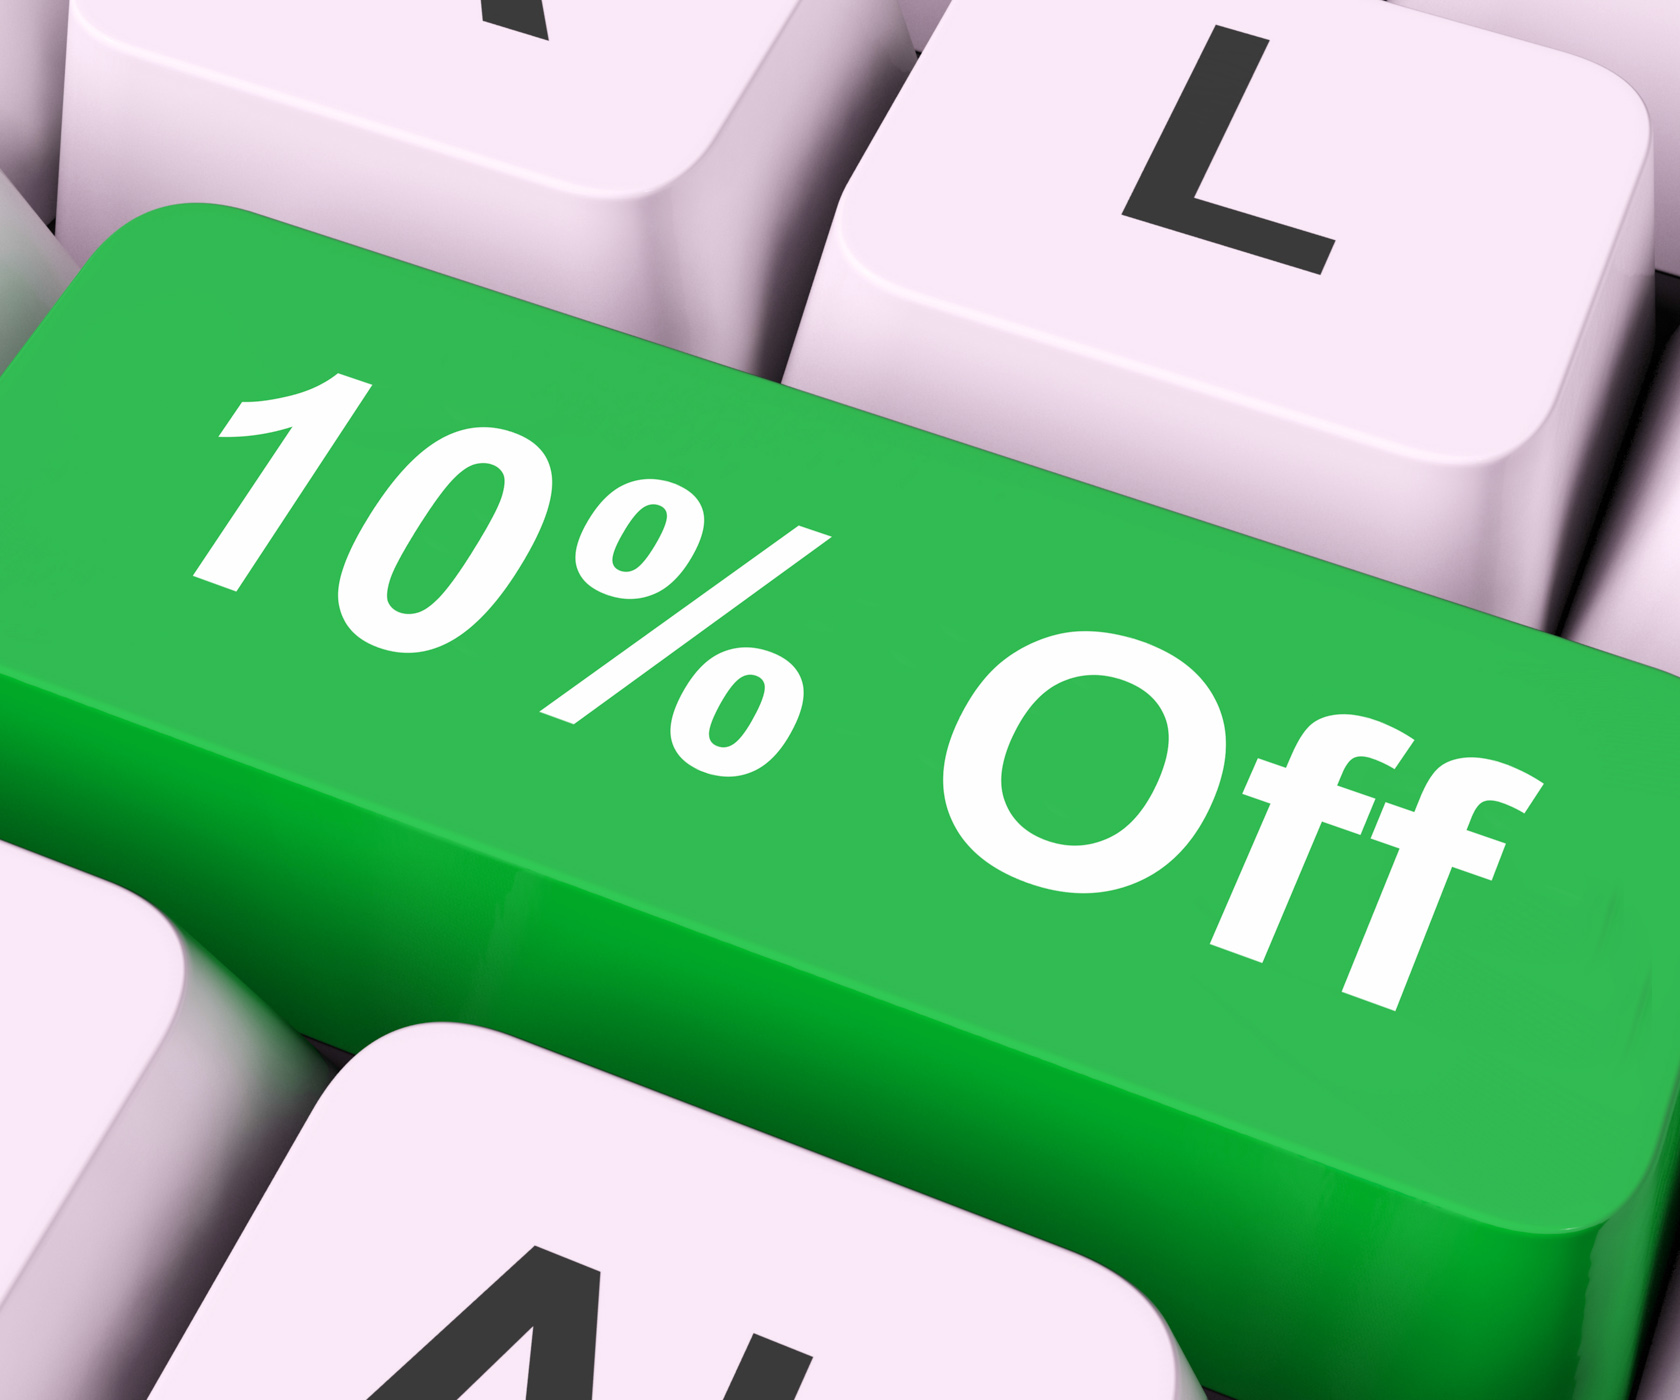 Ten percent off key means discount or sale photo